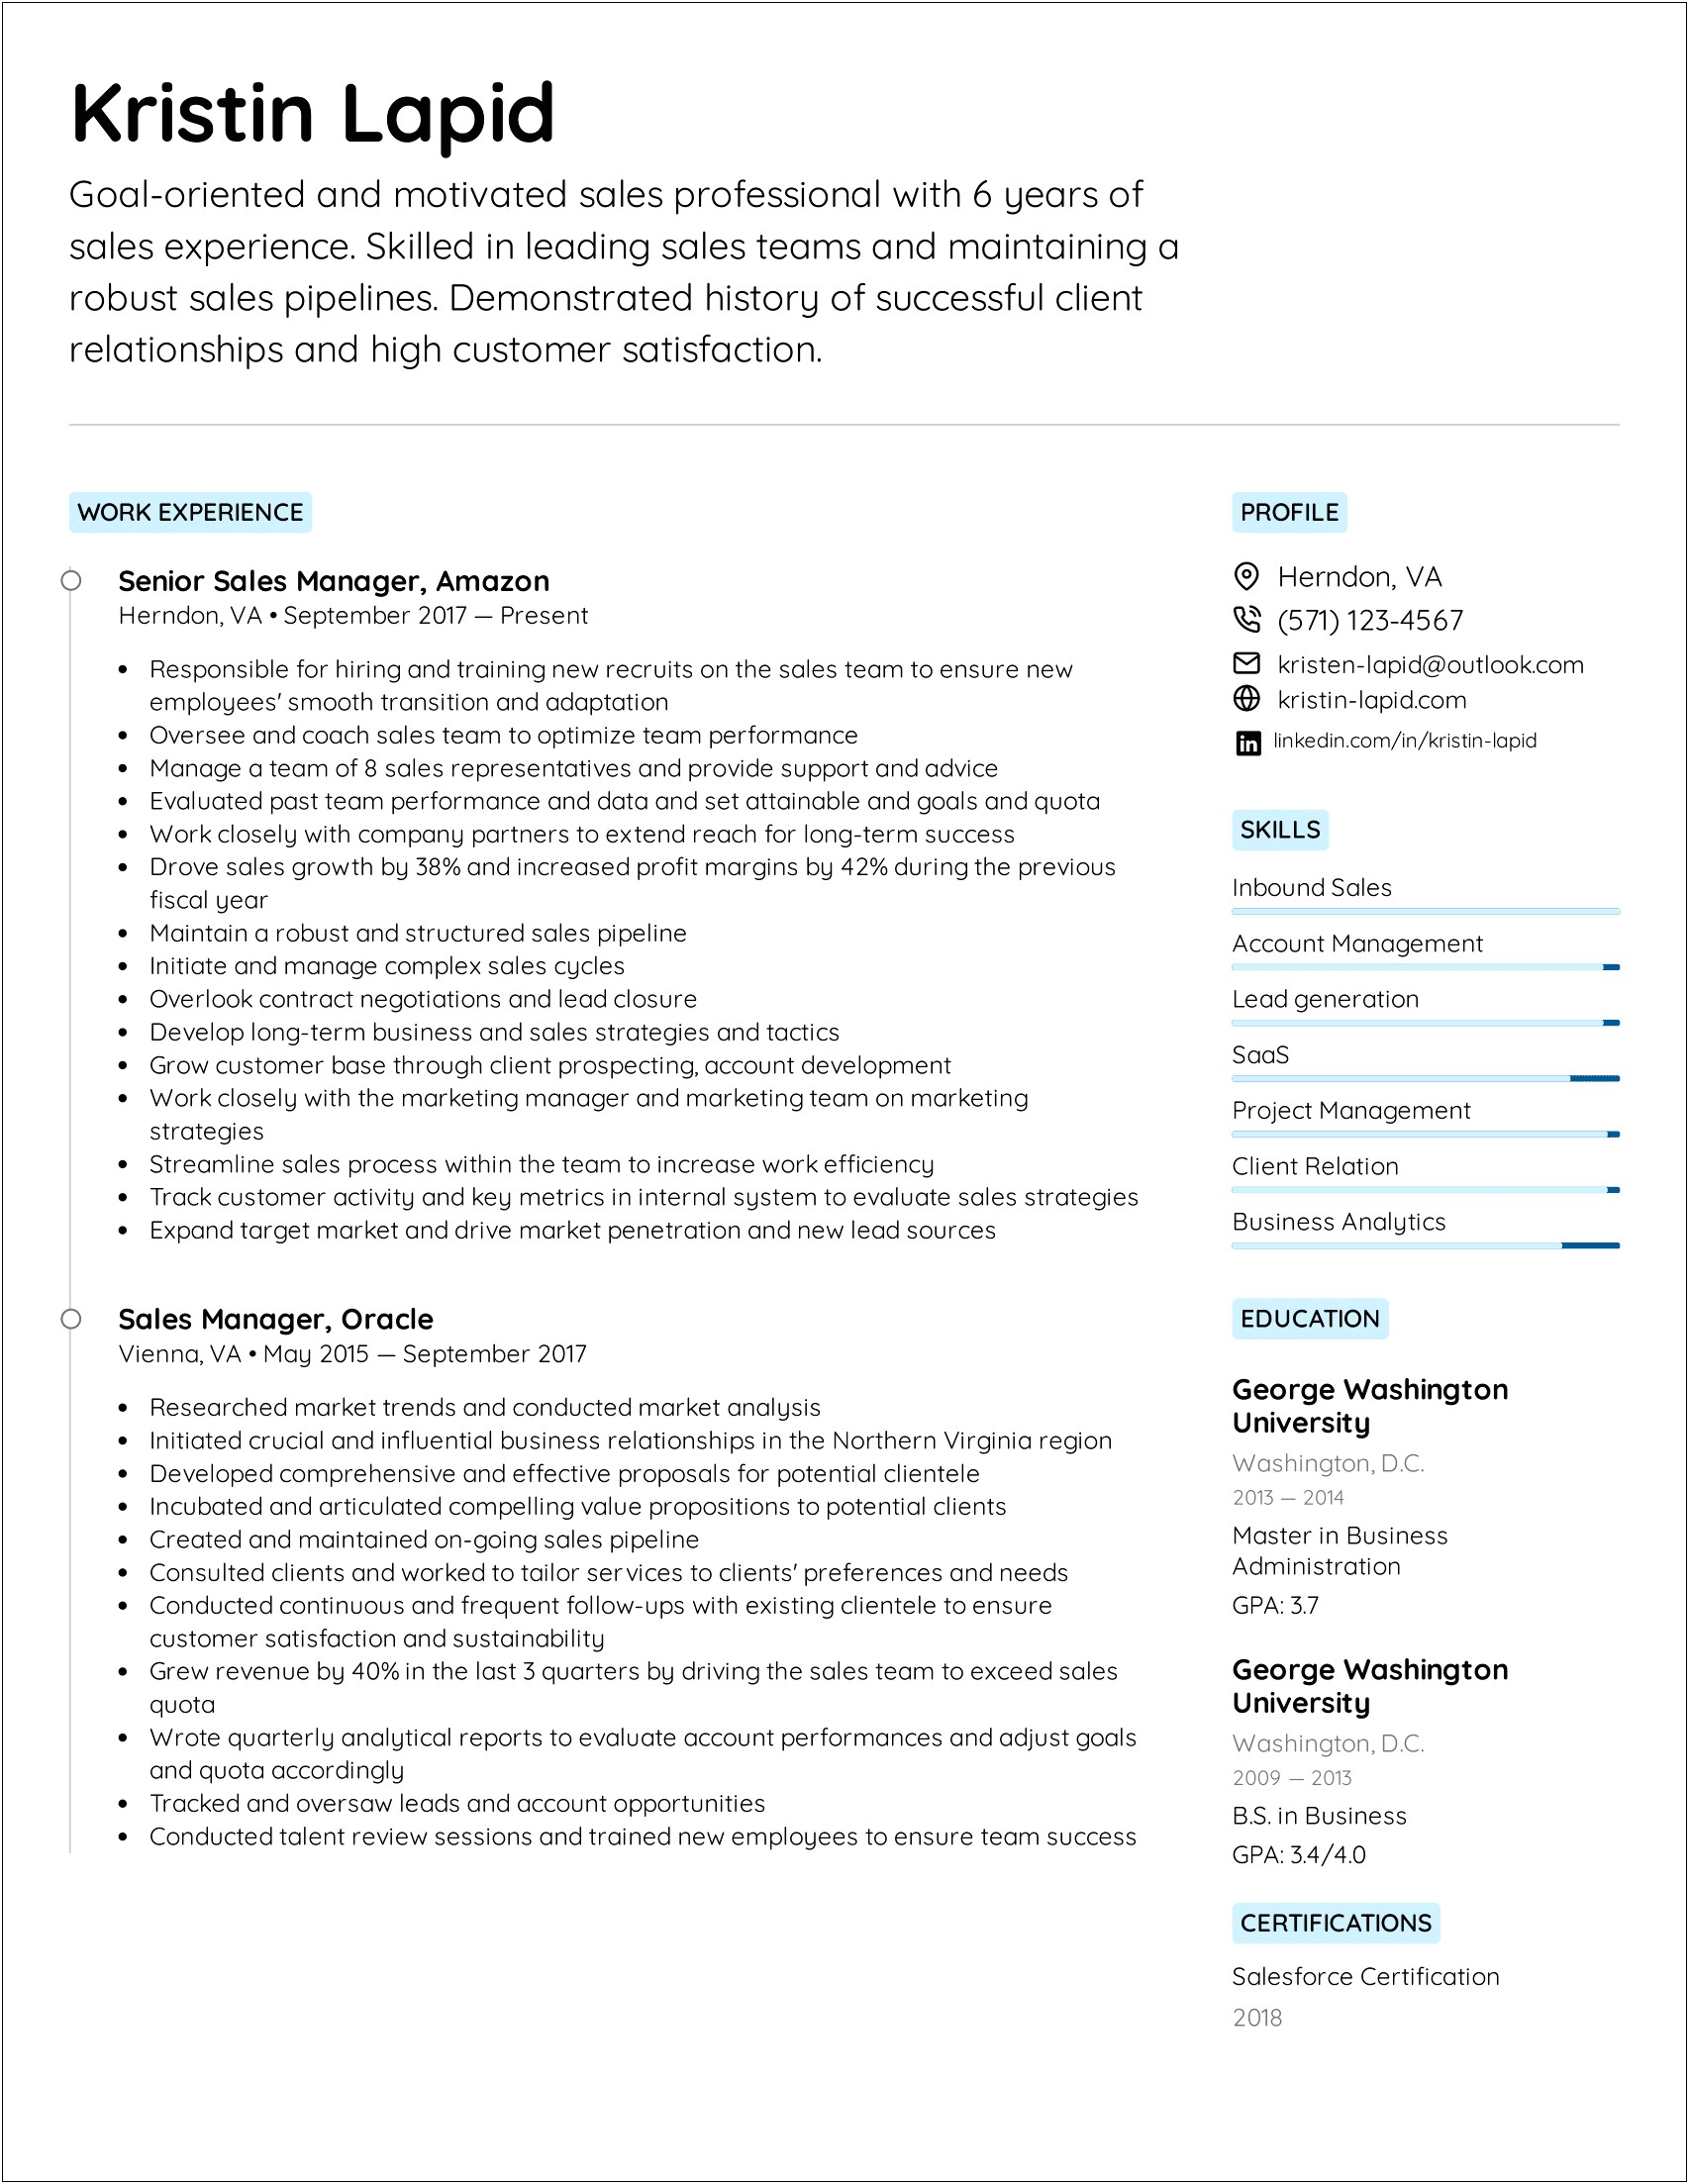 Examples Of Achievement Oriented Resumes